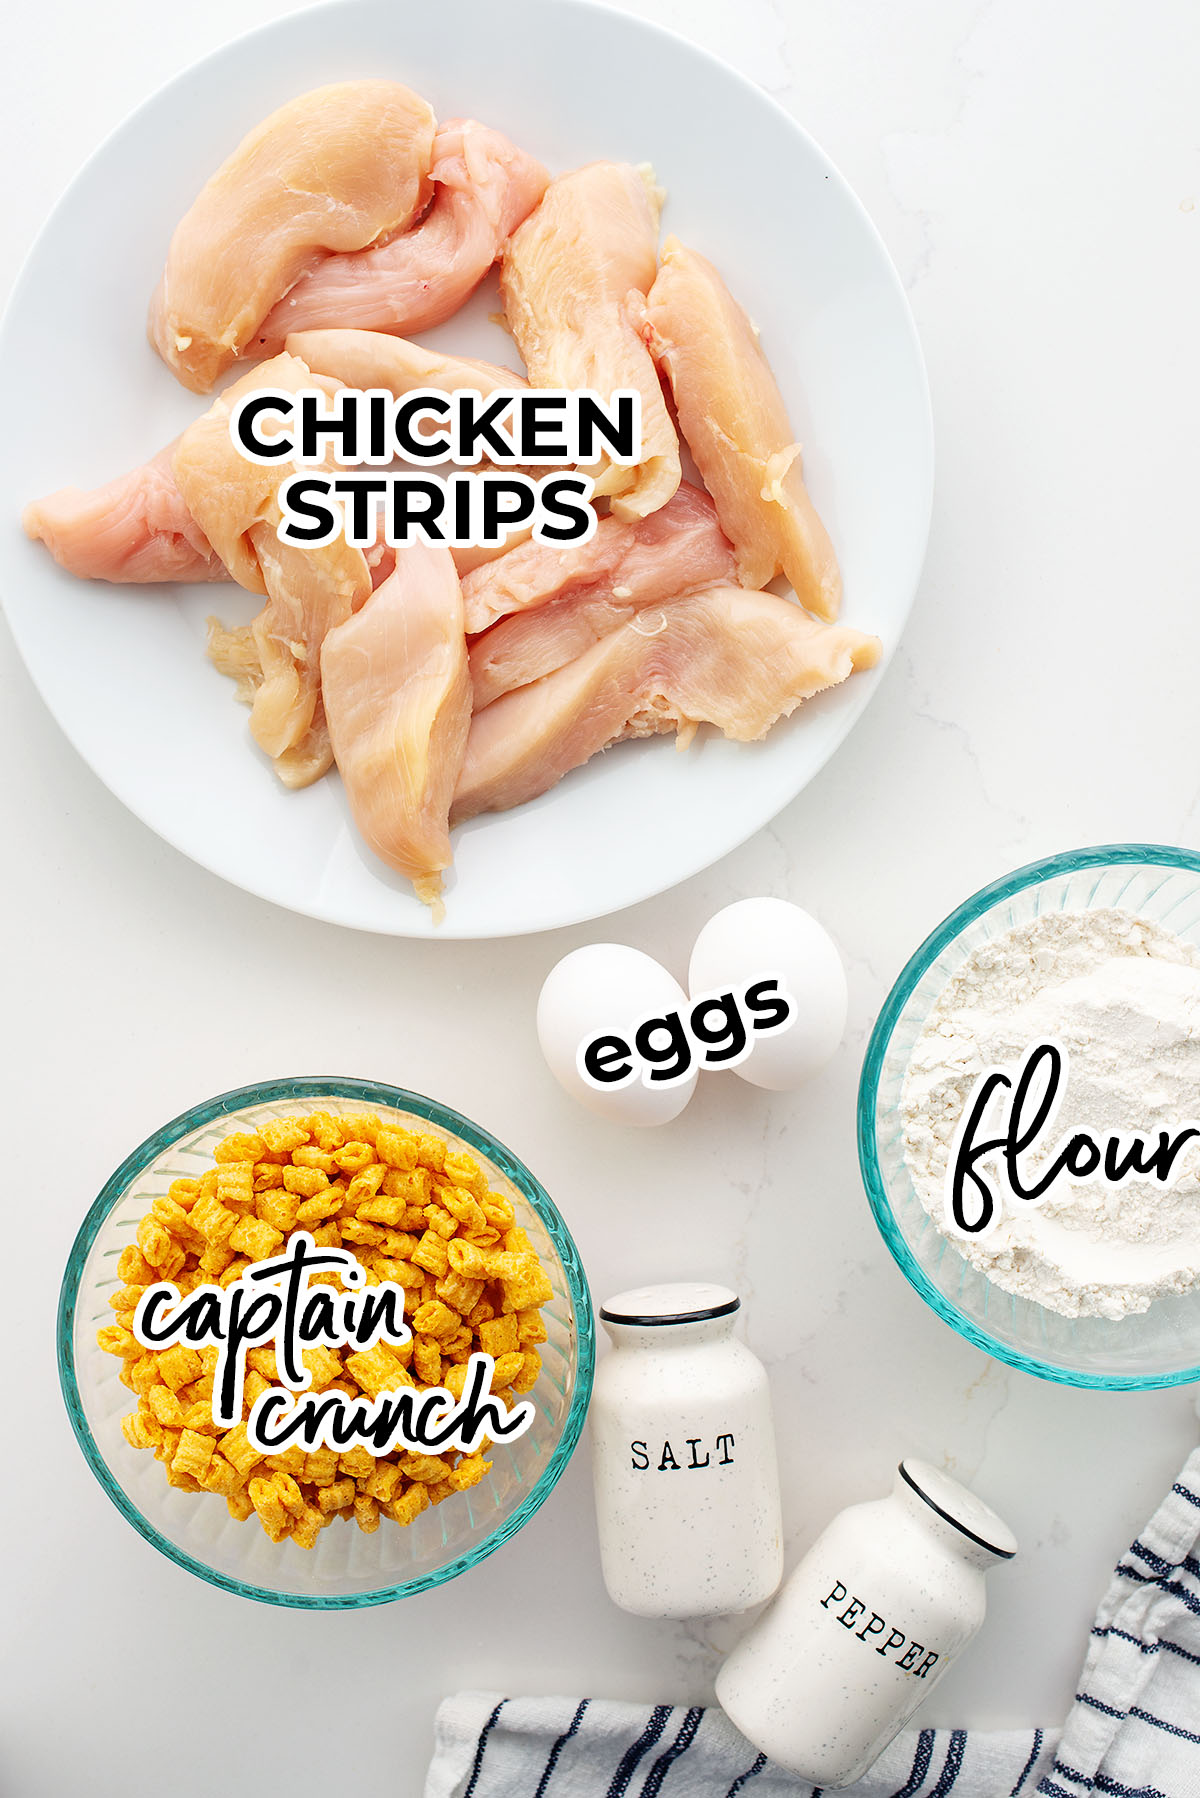 Captain Crunch chicken strips ingredients spread out on a countertop.